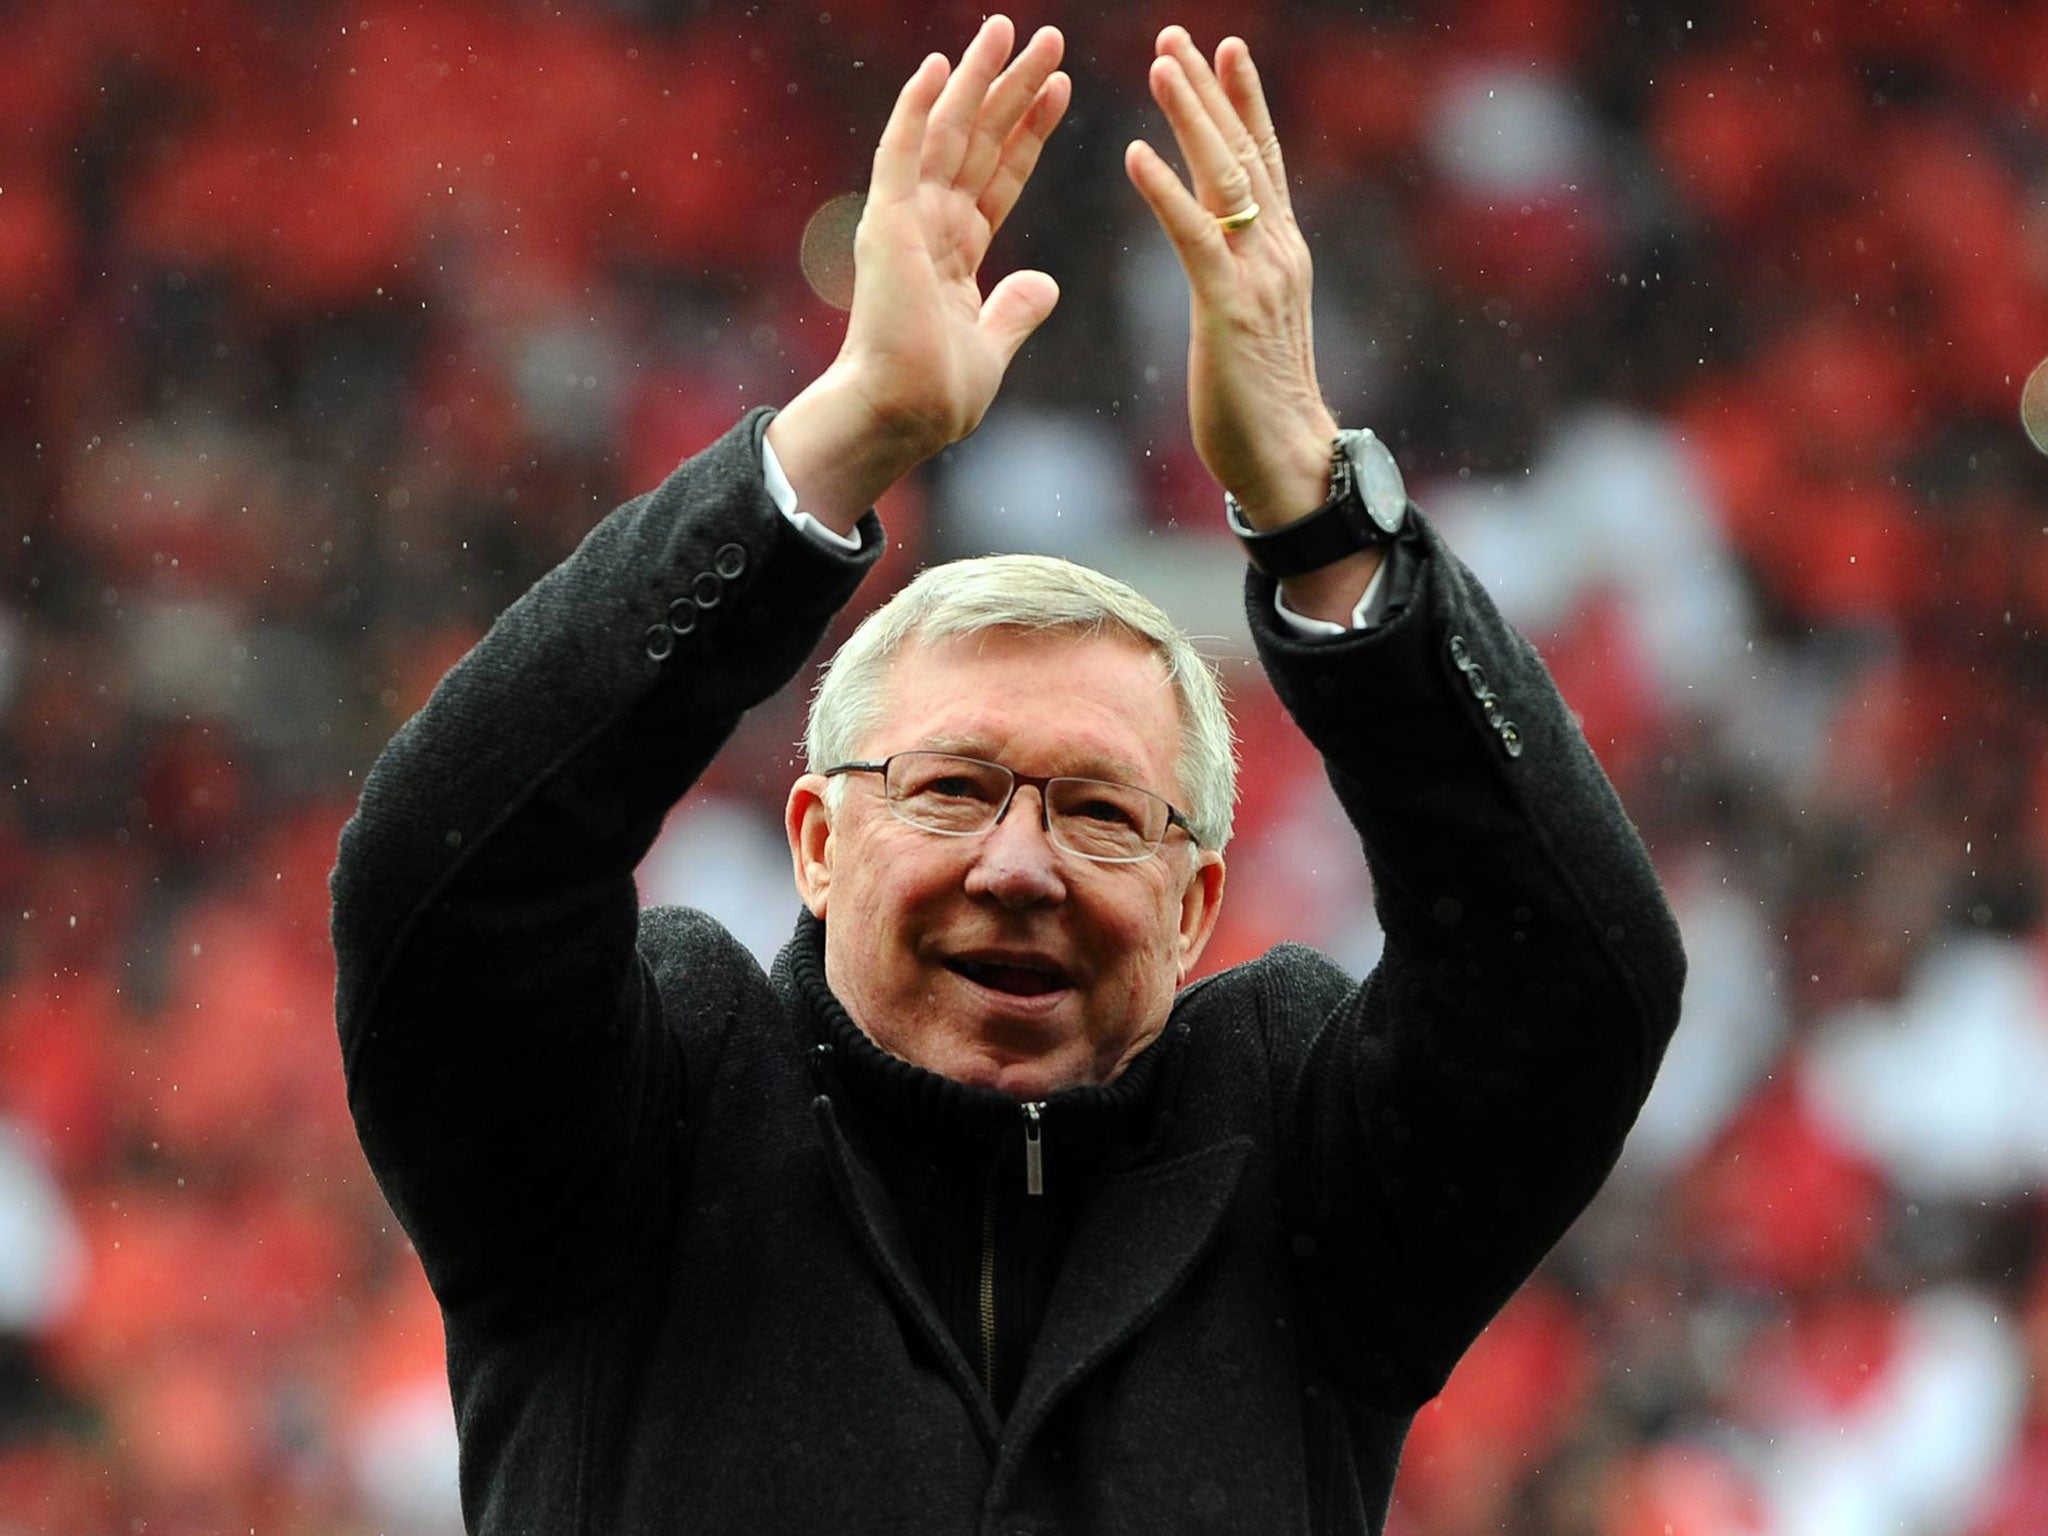 Manchester United's Scottish manager Alex Ferguson applauds as he arrives on the field (Andrew Yates/AFP/Getty Images)